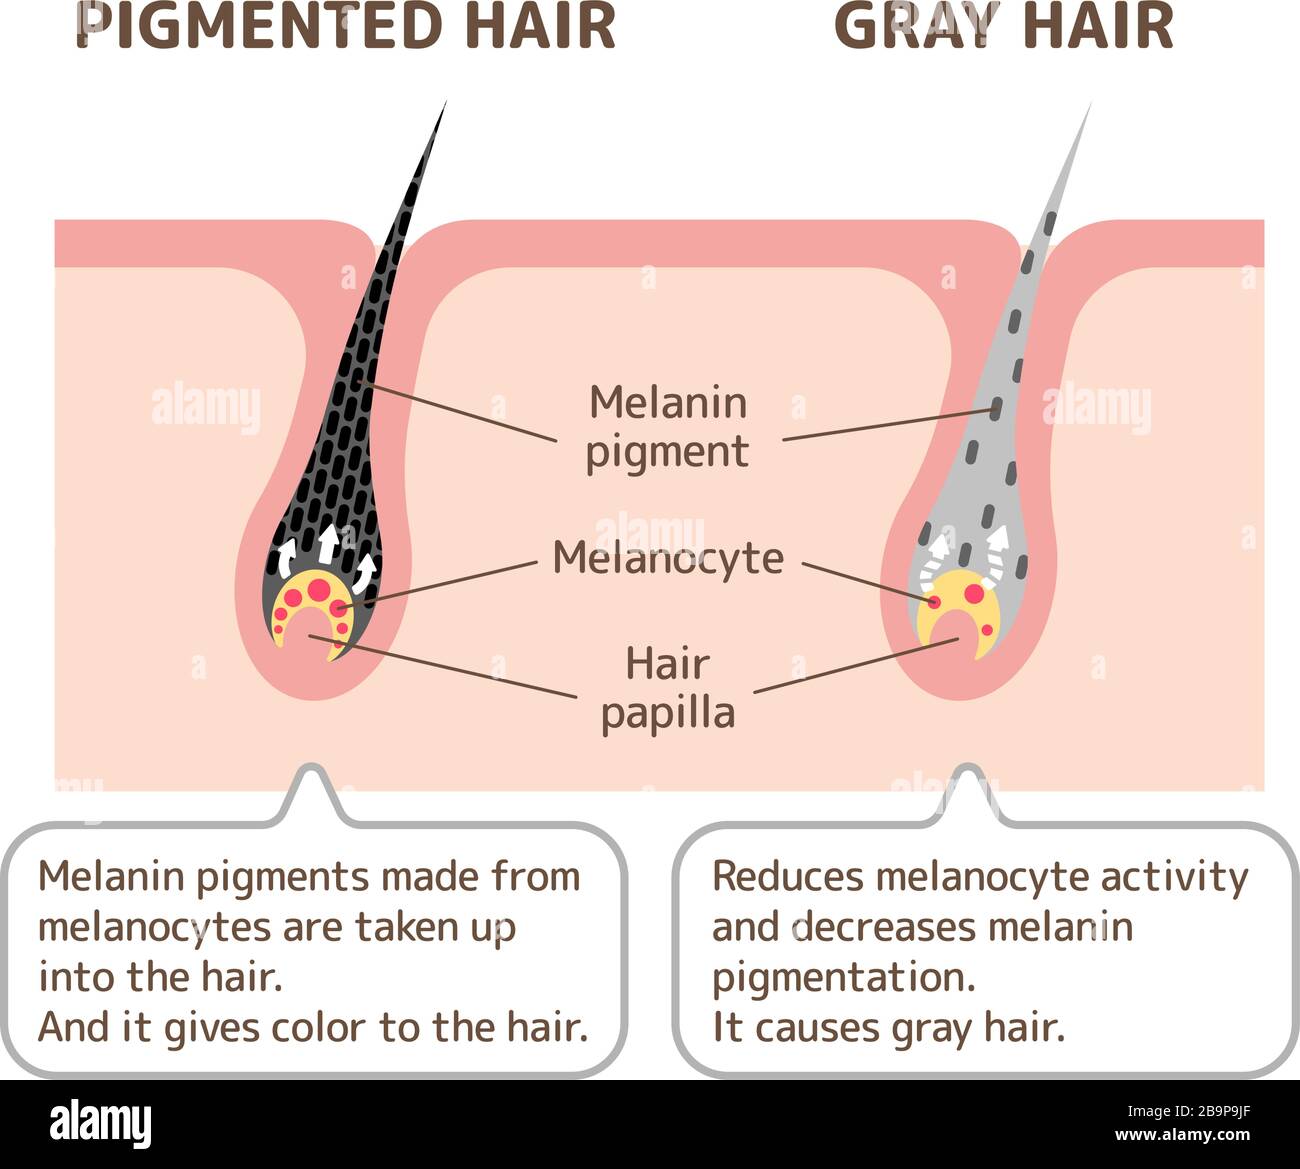 Mechanism of pigmented hair and gray hair / comparison vector illustration Stock Vector